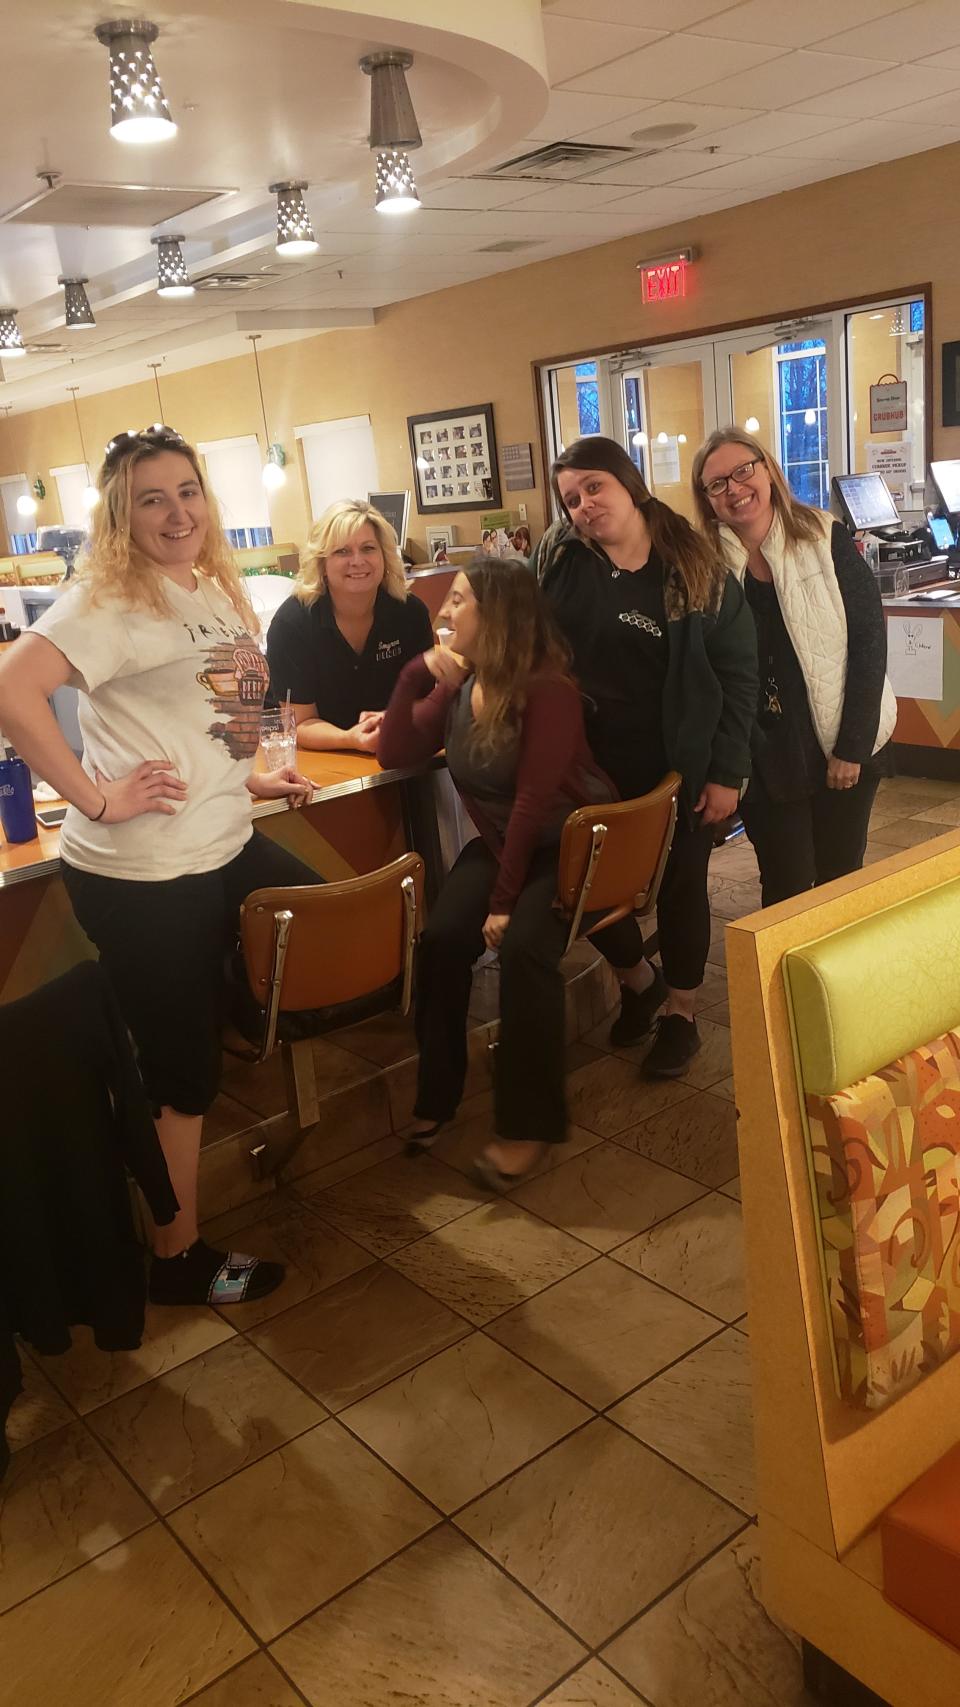 Staff at the Smyrna Diner get ready Friday to handle full menu take-out and other orders: From left, Ashley White, Verna Woodard, Miranda DiMaio, Samantha Rowlands and owner Jamie Compton.,